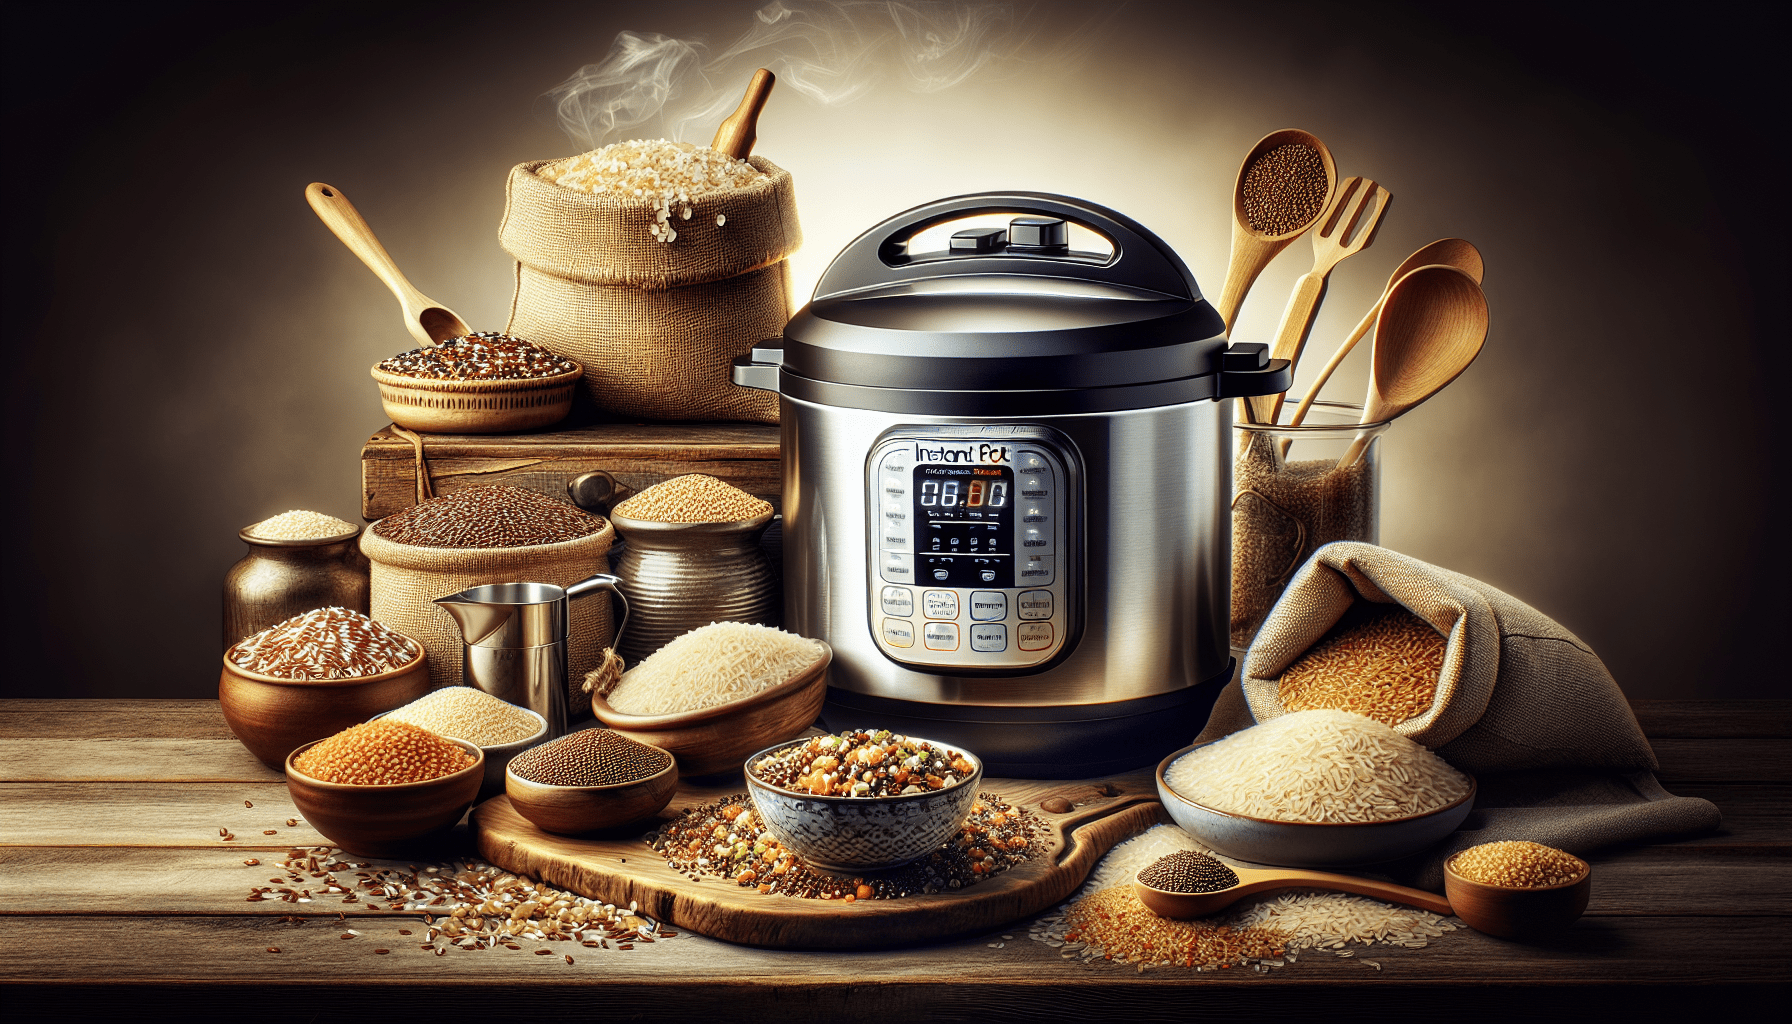 How Do I Use The Multigrain Function On An Instant Pot?